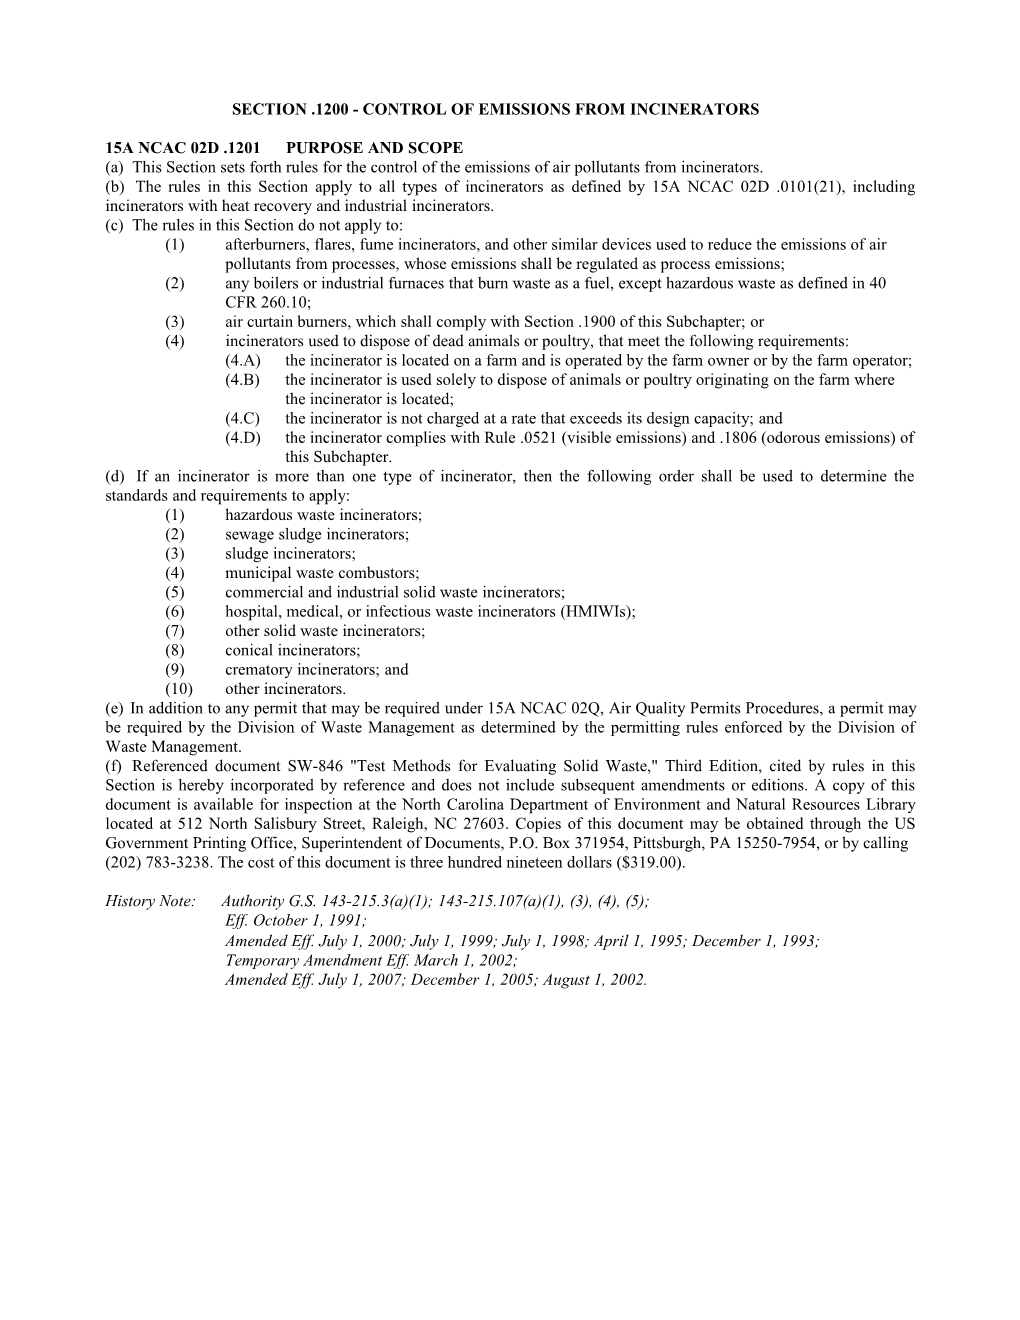 Section .1200 - Control of Emissions from Incinerators